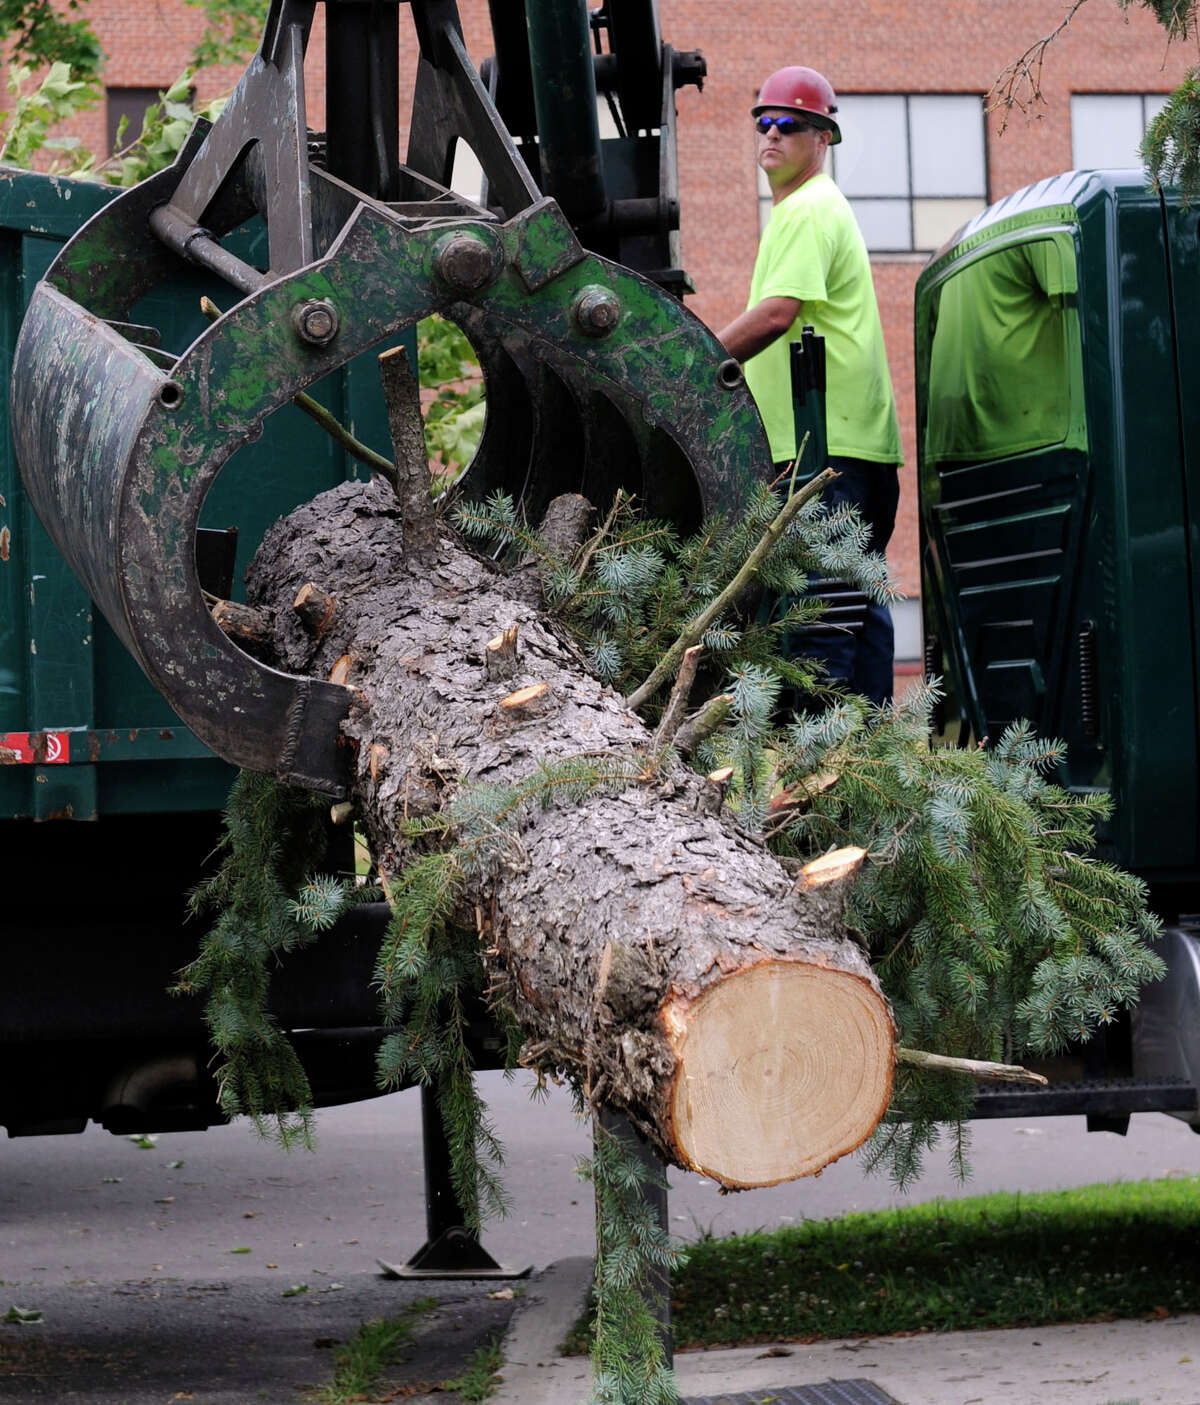 Heath Hobart, with the city forestry department, works a log loader at Rogers Park where city workers are still cleaning up debris from Wednesday storm, Thursday, July 19, 2012.